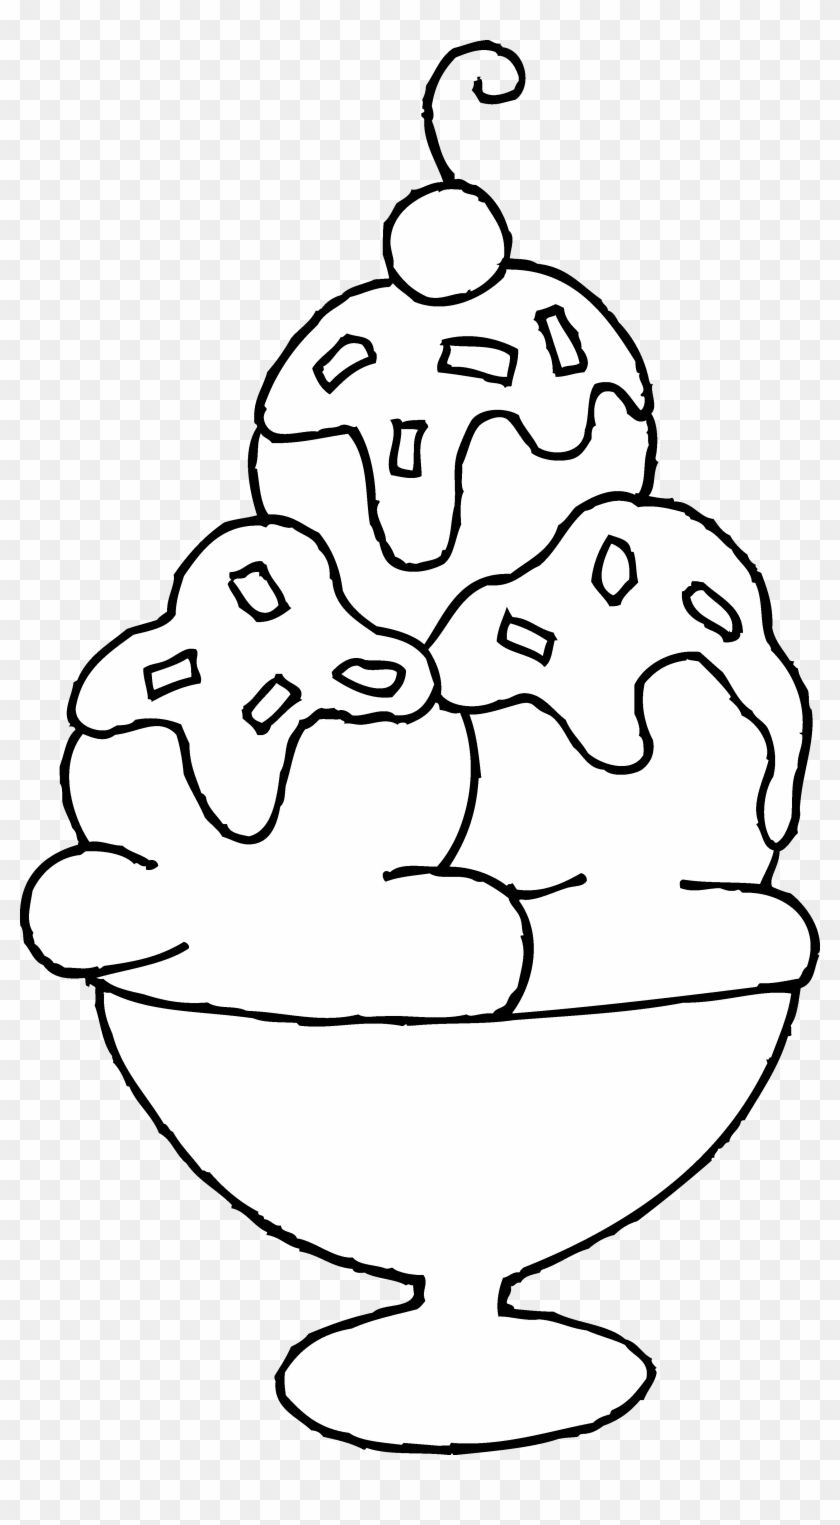 Best Photos Of Ice Cream Bowl Coloring Page - Ice Cream Sundae Drawing Clipart #1327236